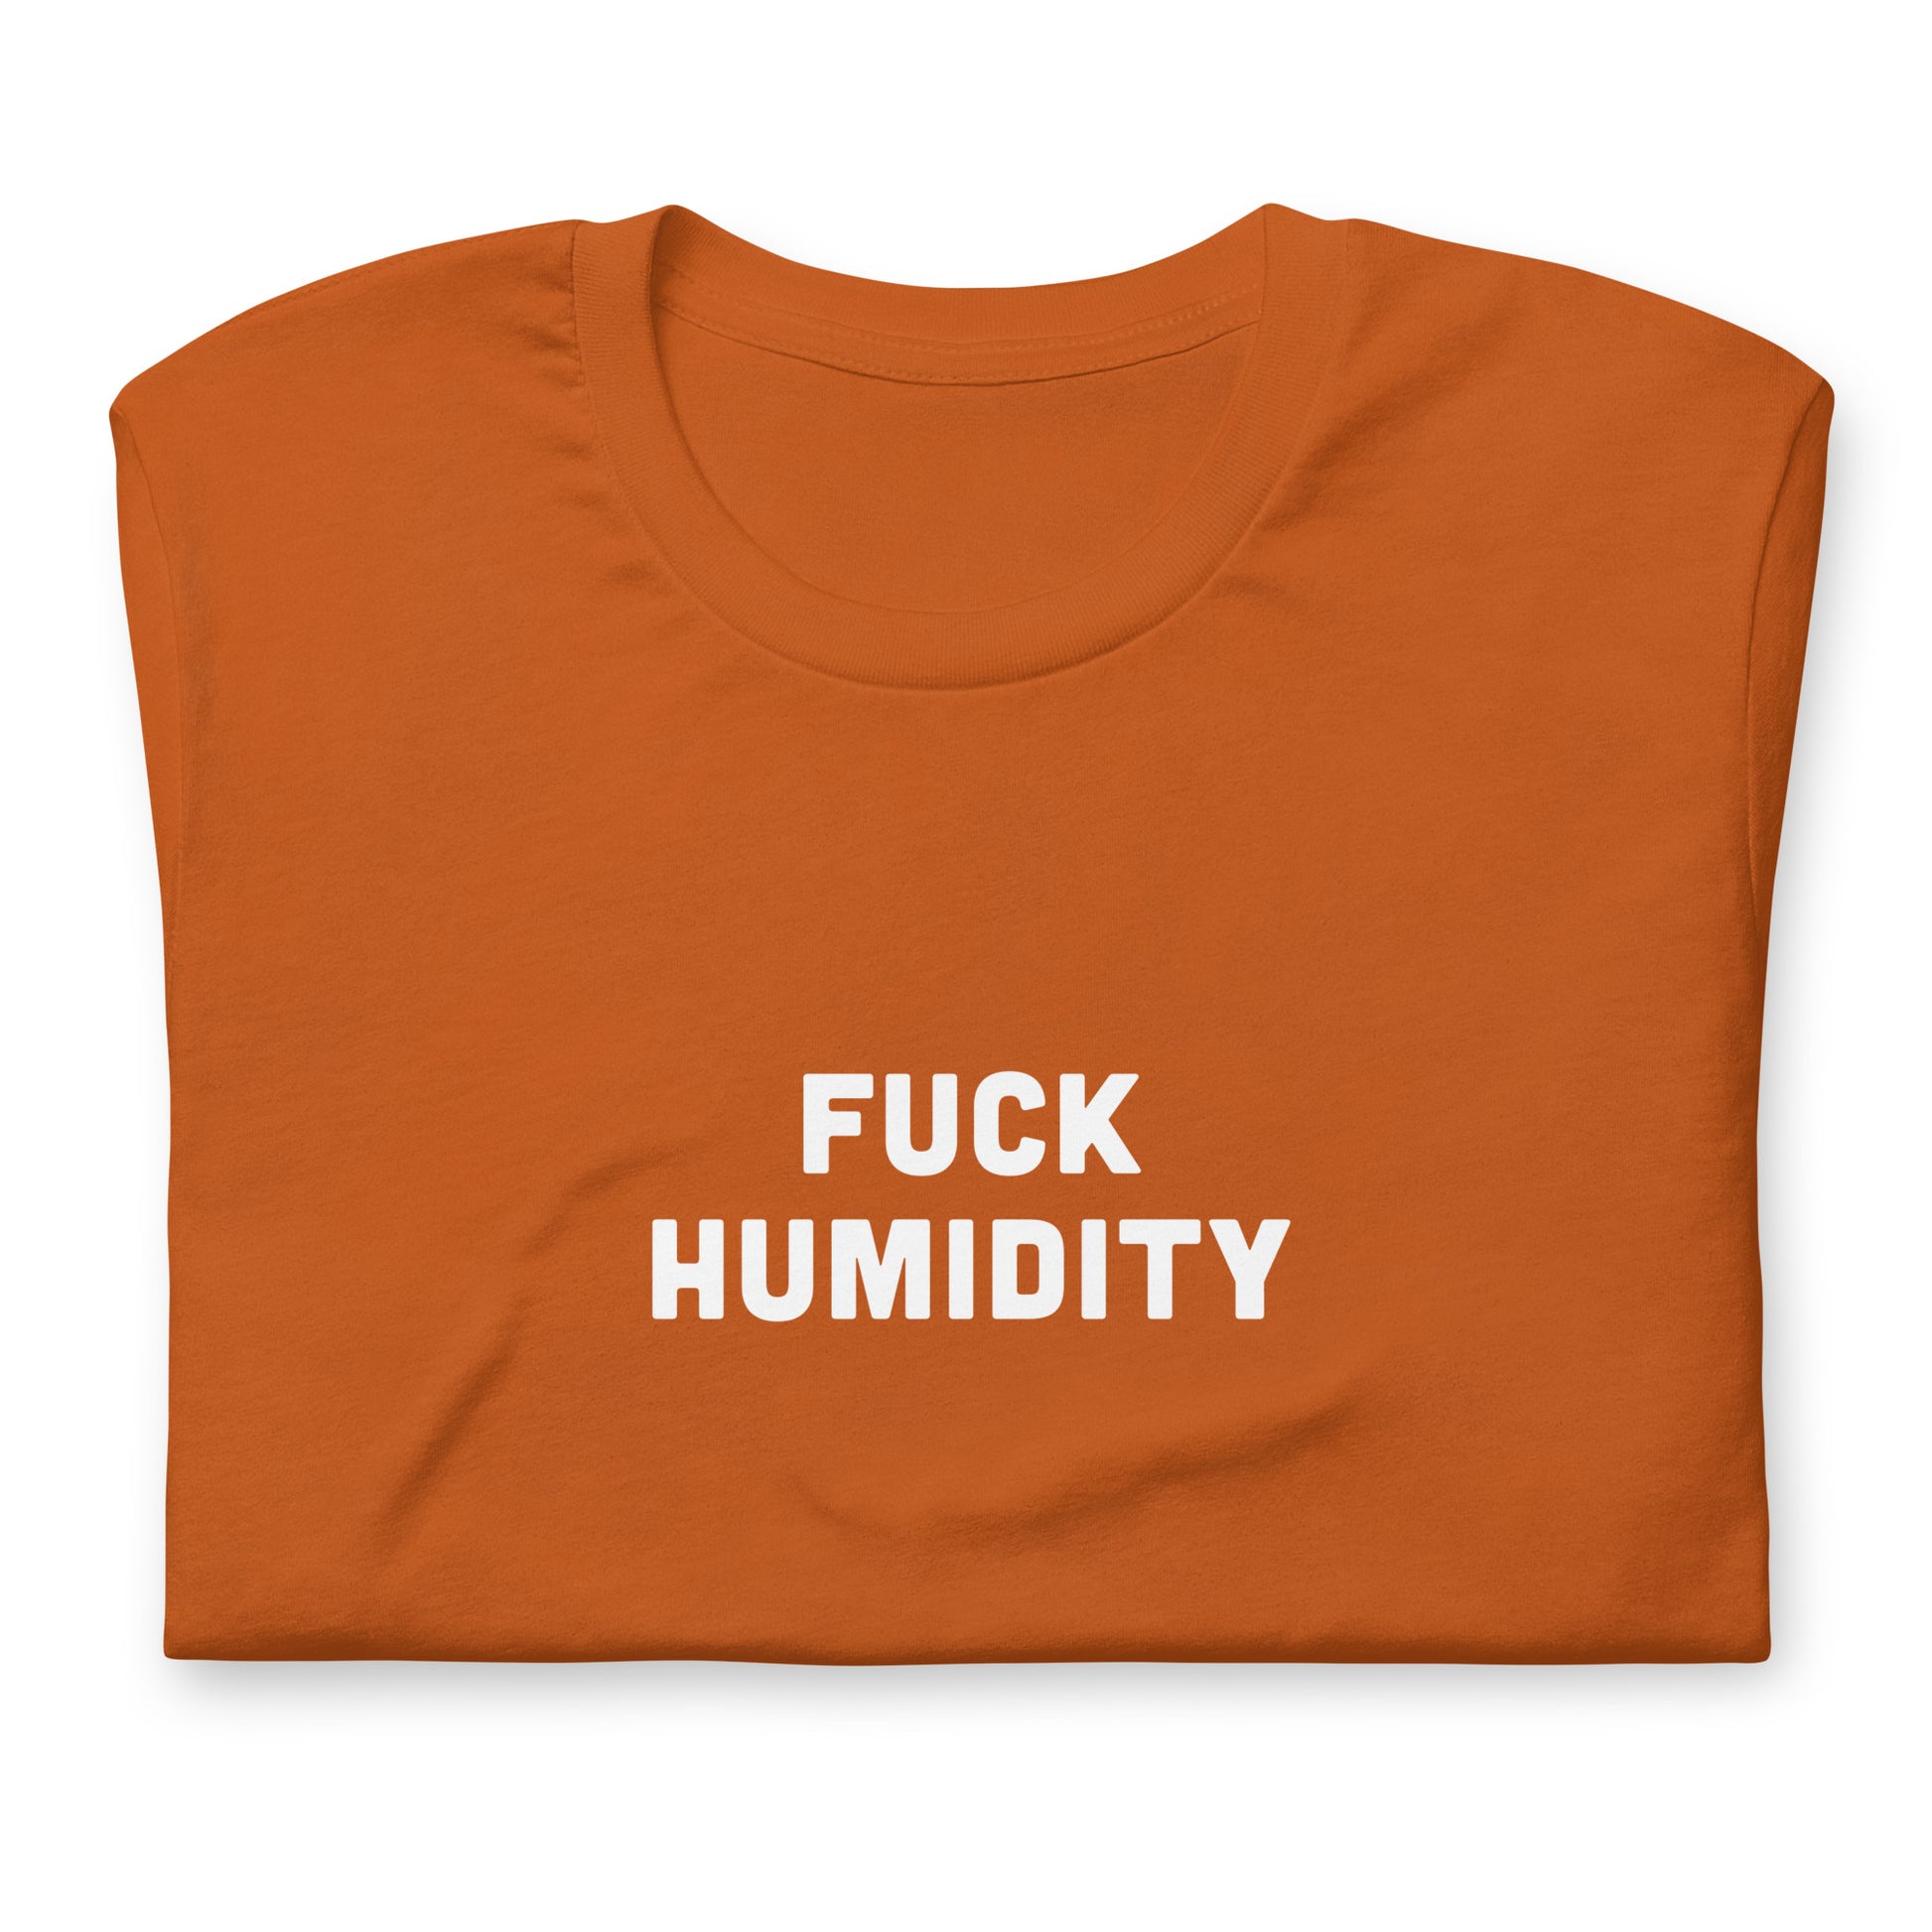 Fuck Humidity T-Shirt Size M Color Navy